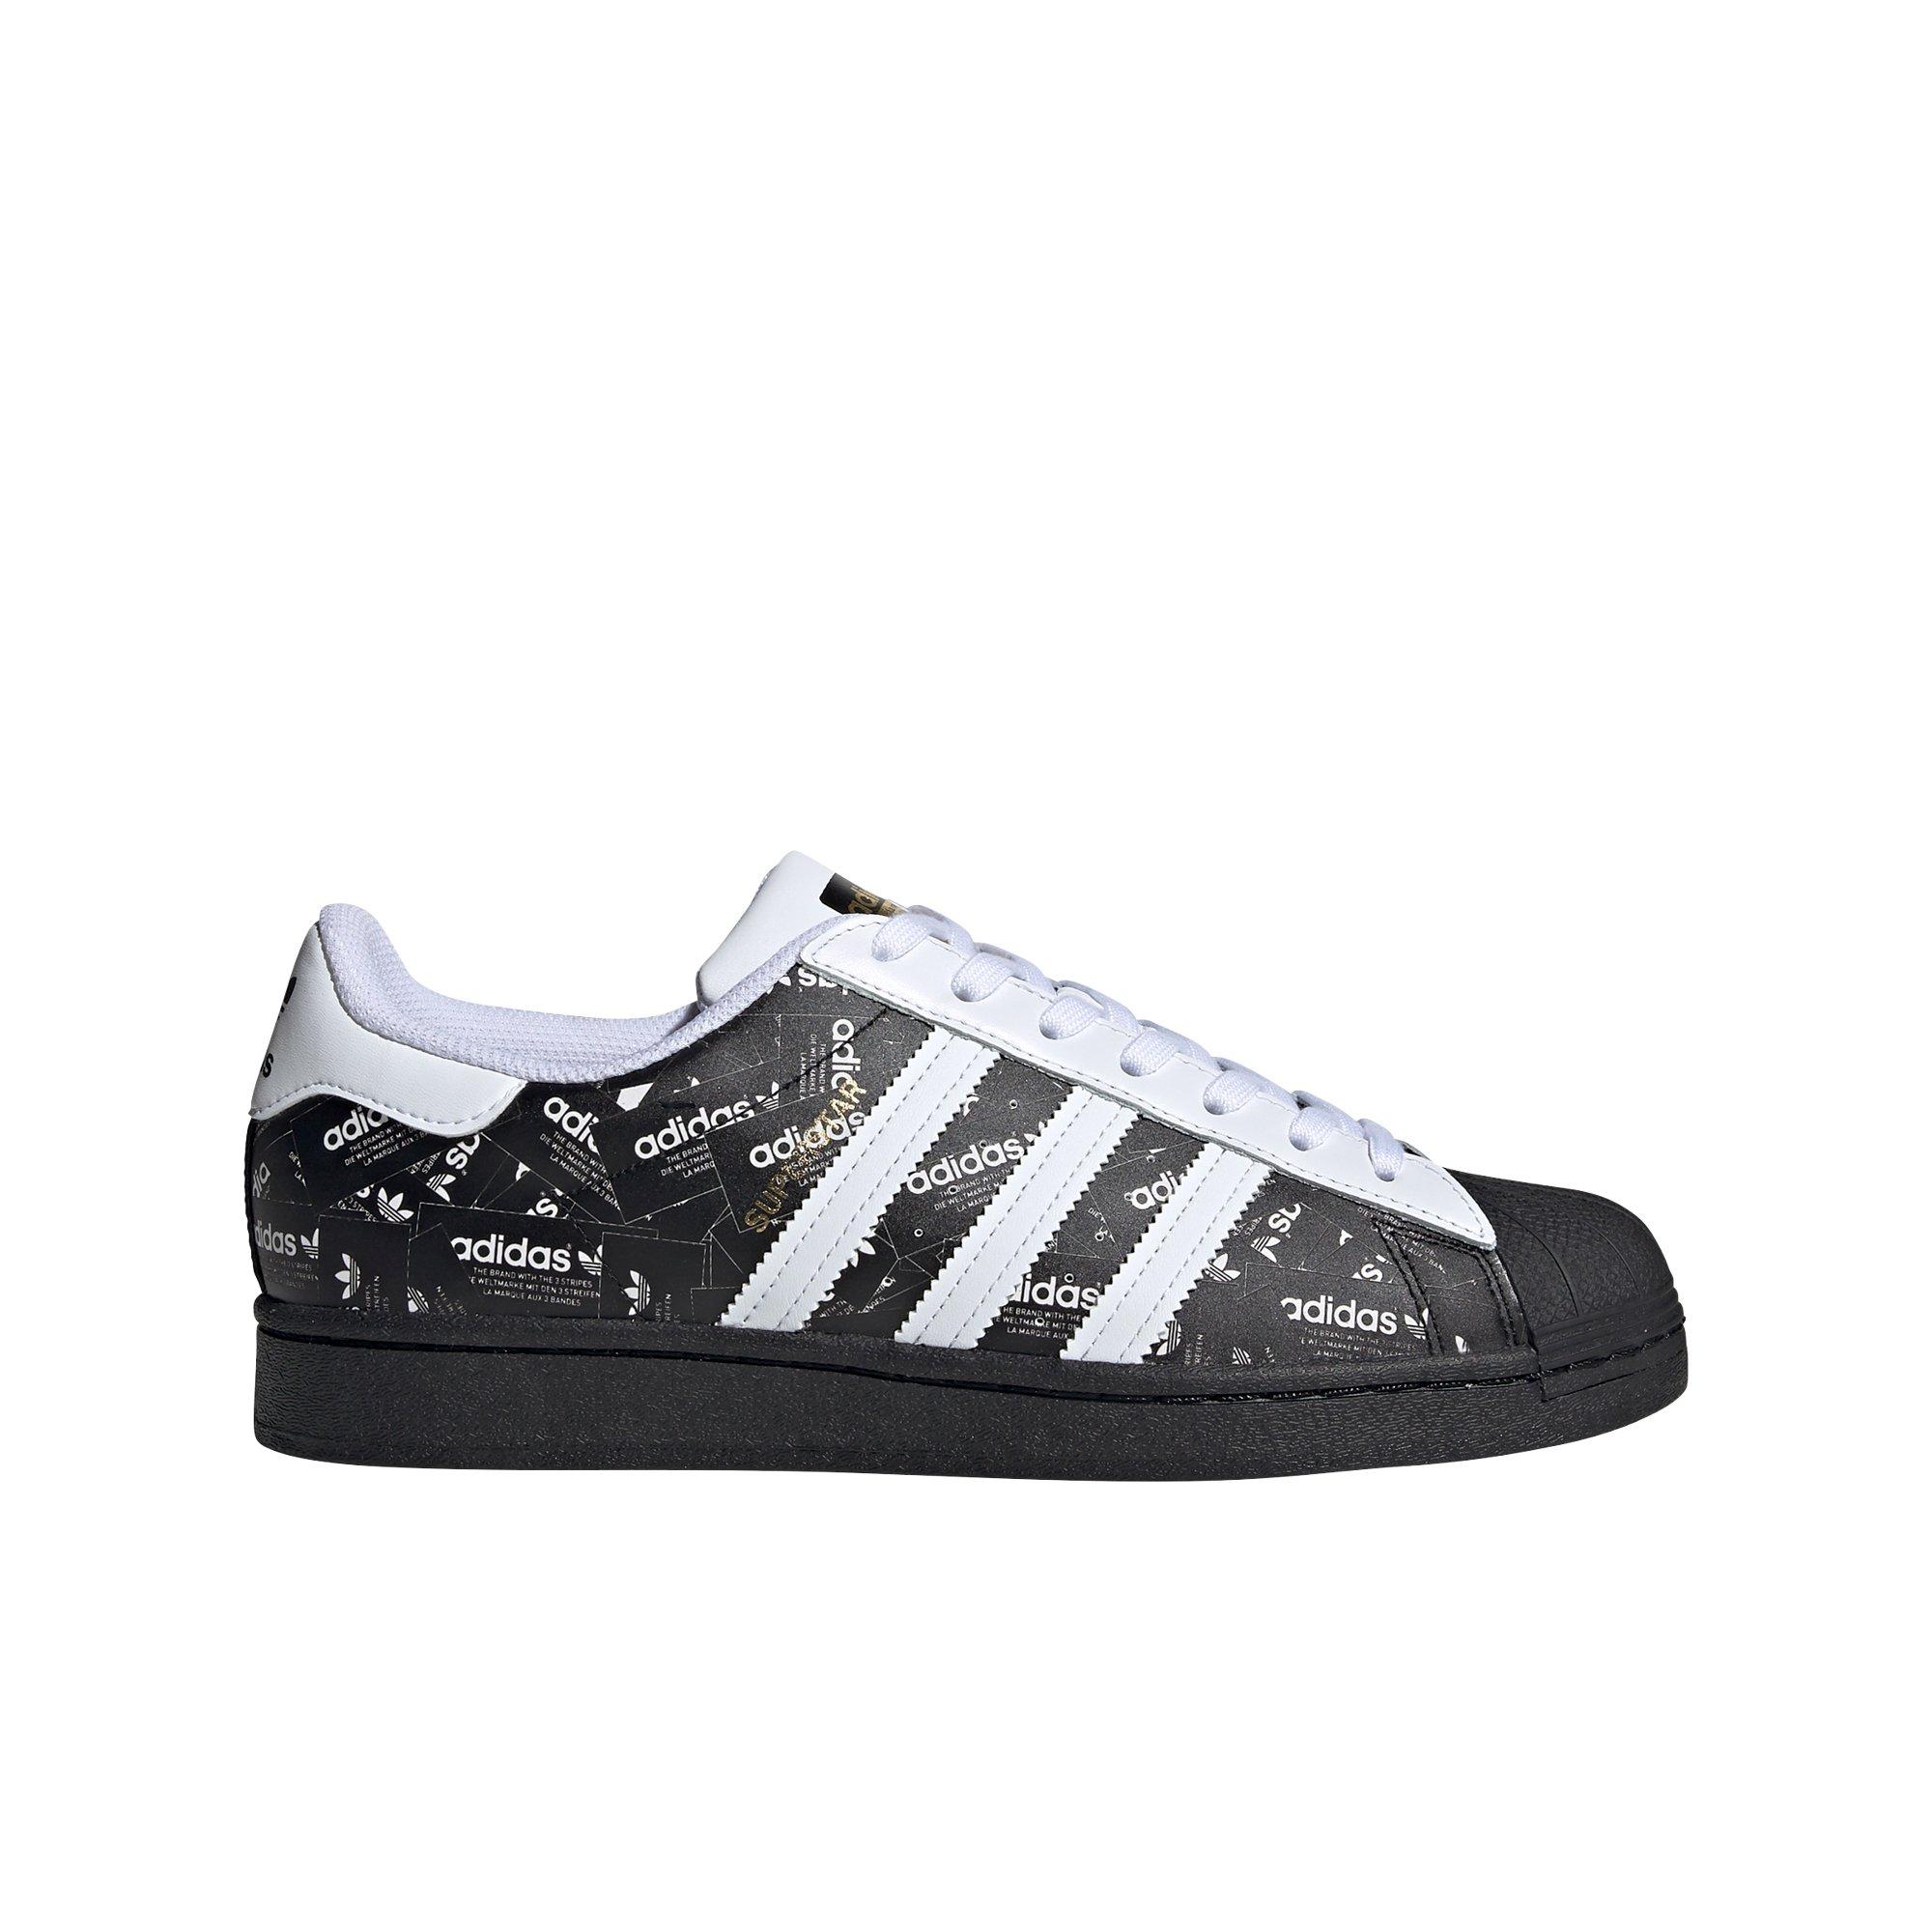 adidas superstar white and black mens